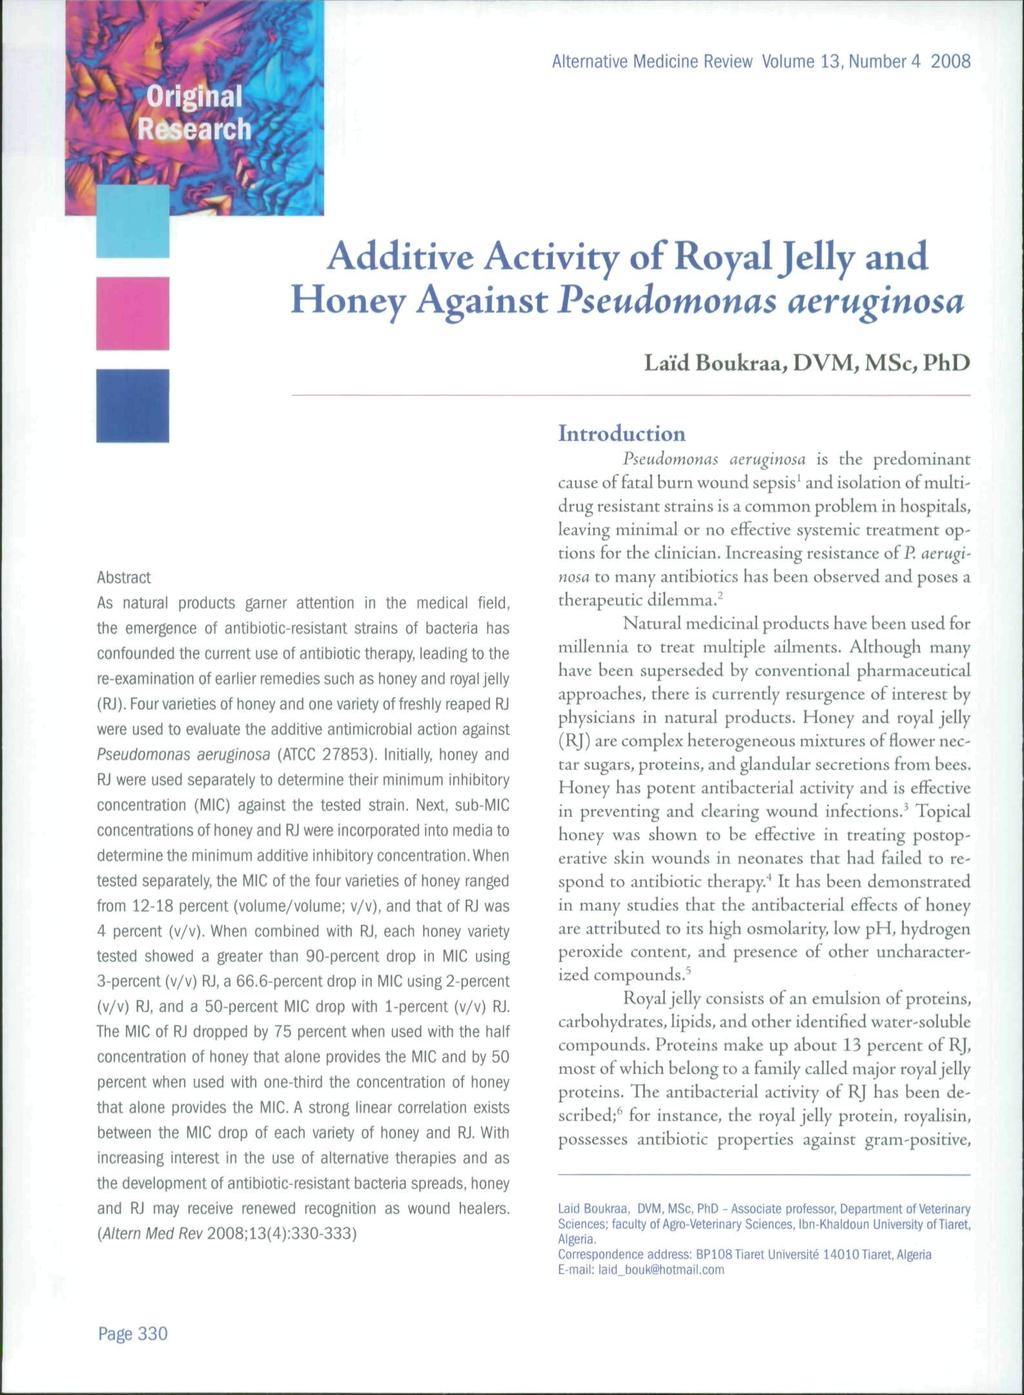 Additive Activity of Royal Jelly and Against Pseudomonas aeruginosa Laid Boukraa, DVM, MSc, PhD Abstract As natural products garner attention in the medical field, the emergence of